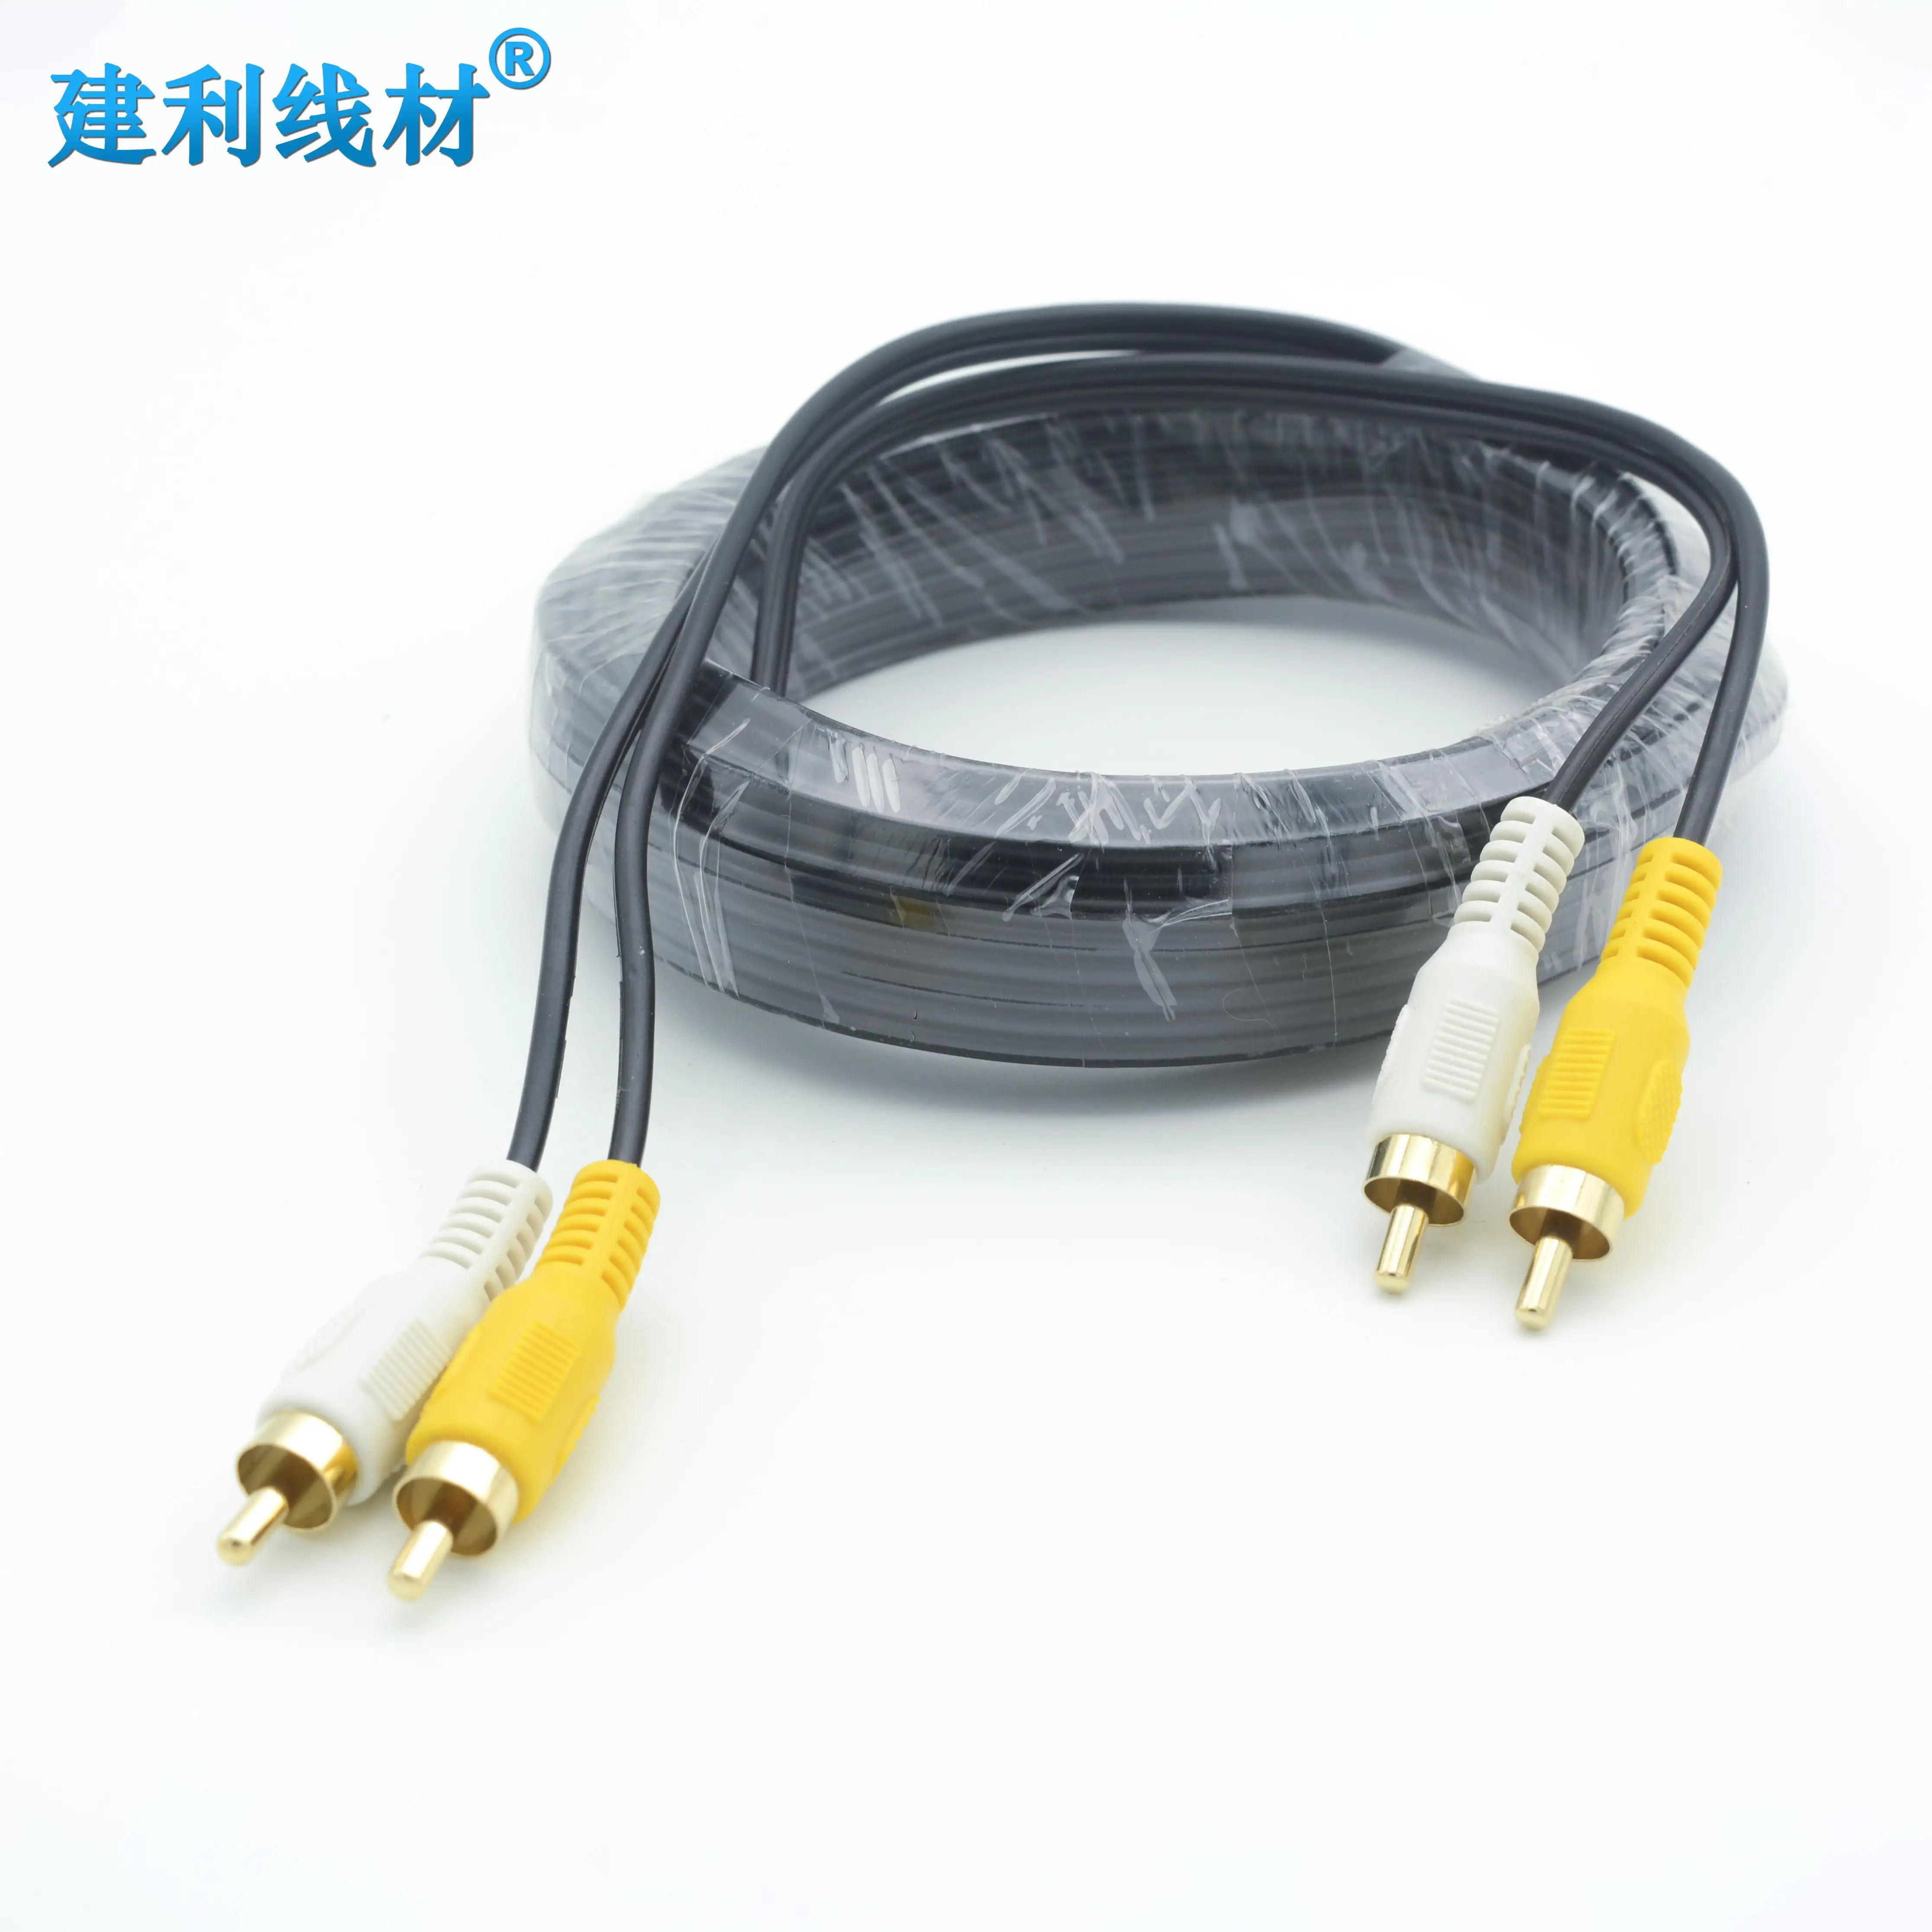 RCA Audio Video Male-to-Male Extension Cable  Suitable for Bus  ca rRearview Systems  CCTV Systems  and Audio-Visual Equipment